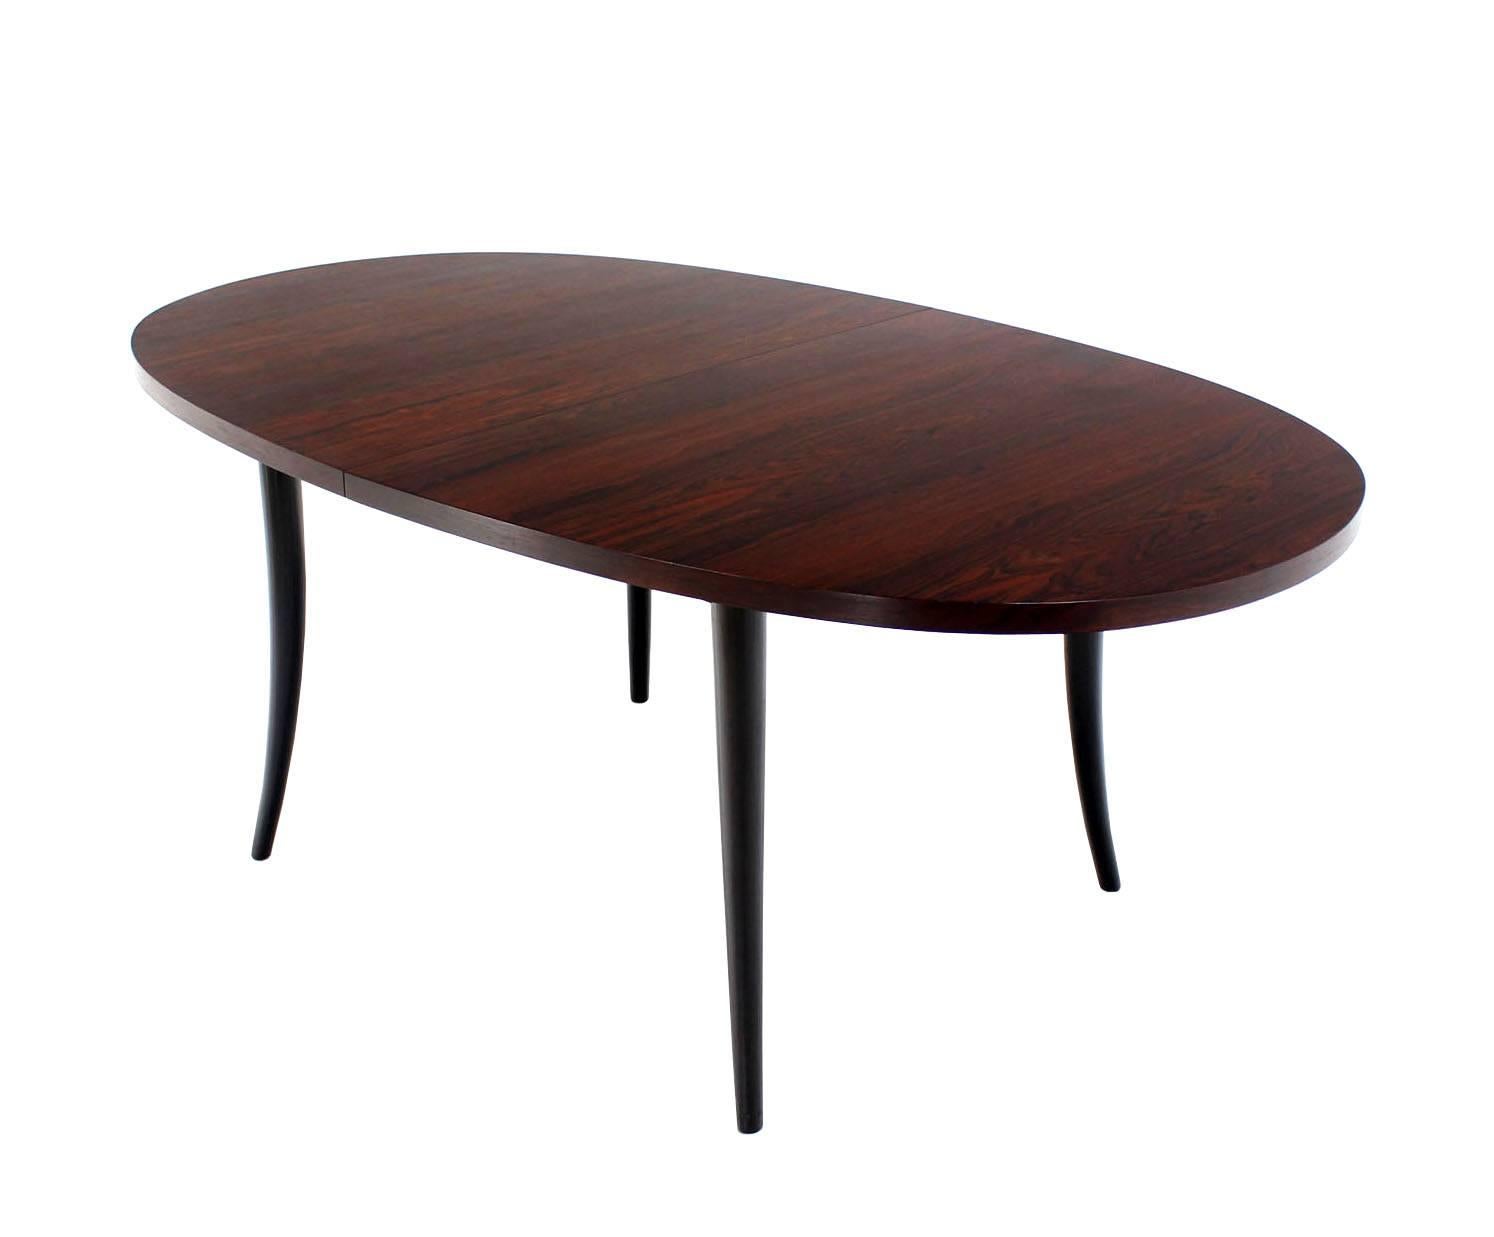 Outstanding Mid-Century Modern rosewood oval dining table with 4 16 inch leaves extension boards. Unmarked.